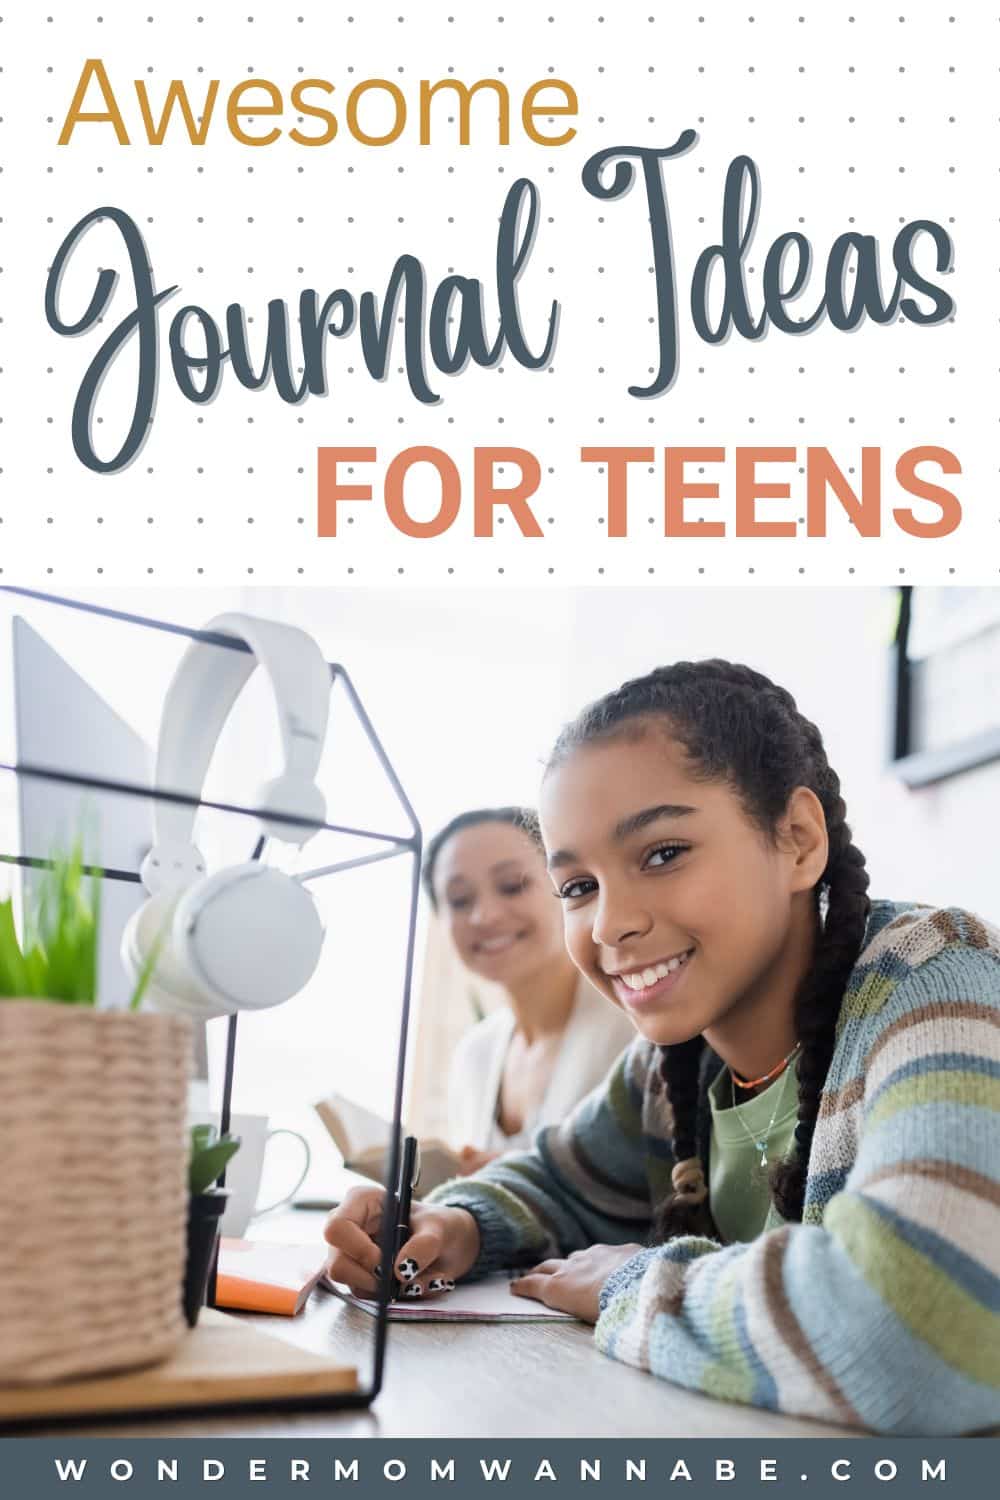 Two teens engaging in journaling activities with a caption reading "awesome journal ideas for teens.